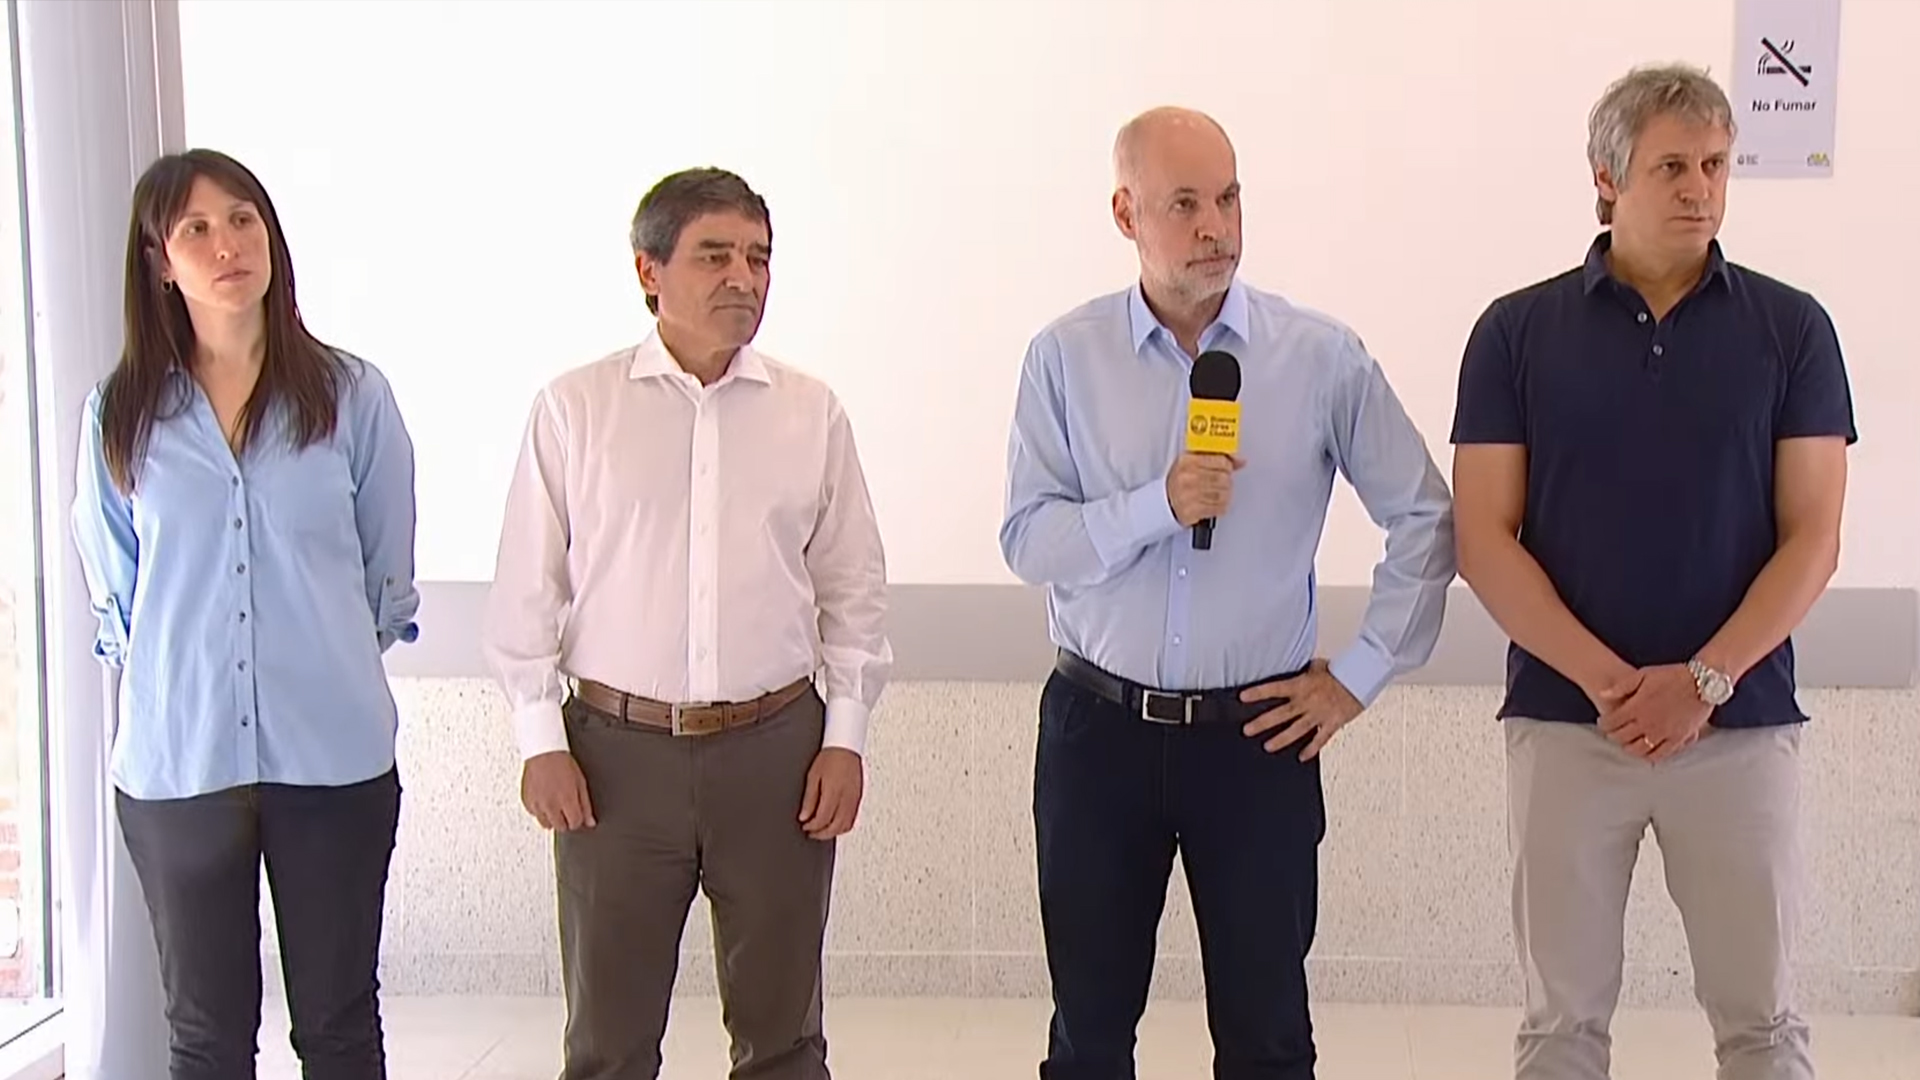 Horacio Rodríguez Larreta spoke during an act in which he formalized the launch of Fernán Quirós as a candidate for Head of Government